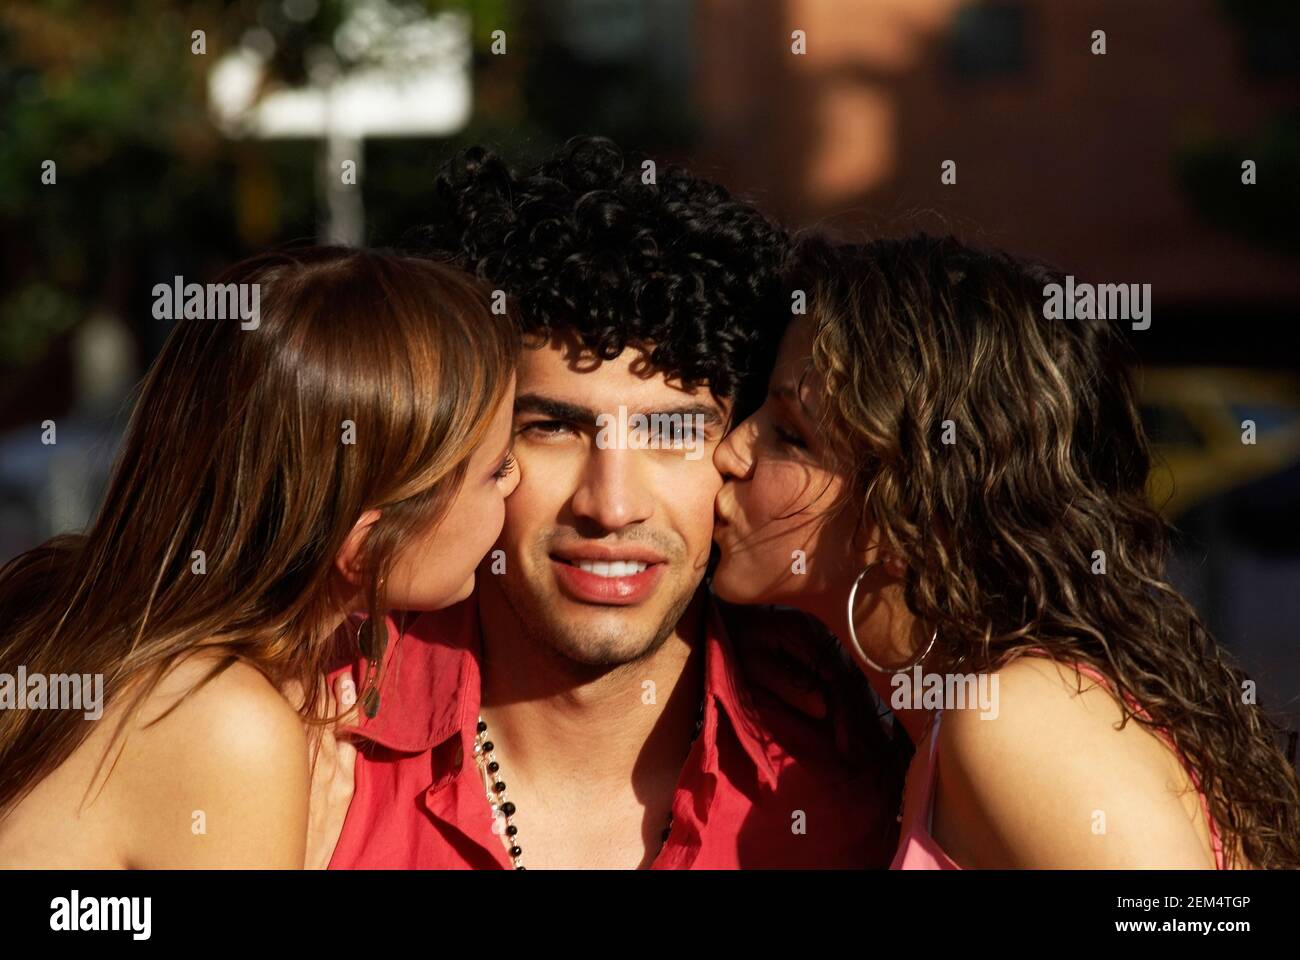 Portrait of two young women kissing a young man Stock Photo